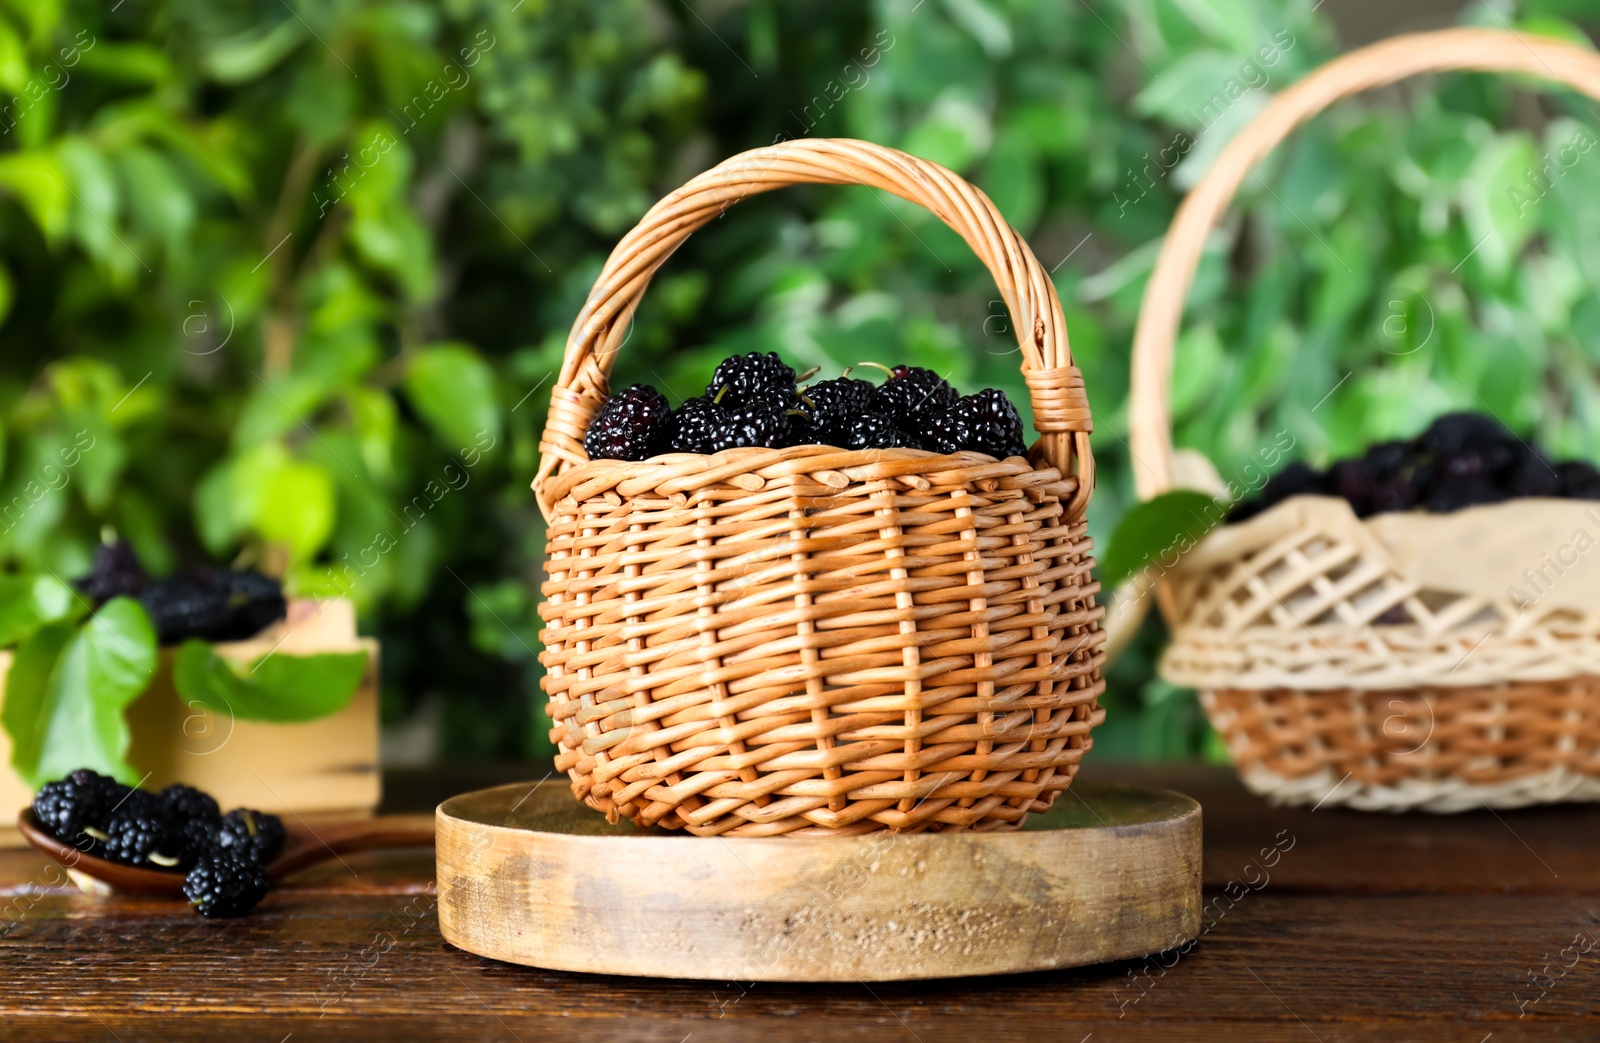 Photo of Fresh ripe black mulberries on wooden table against blurred background